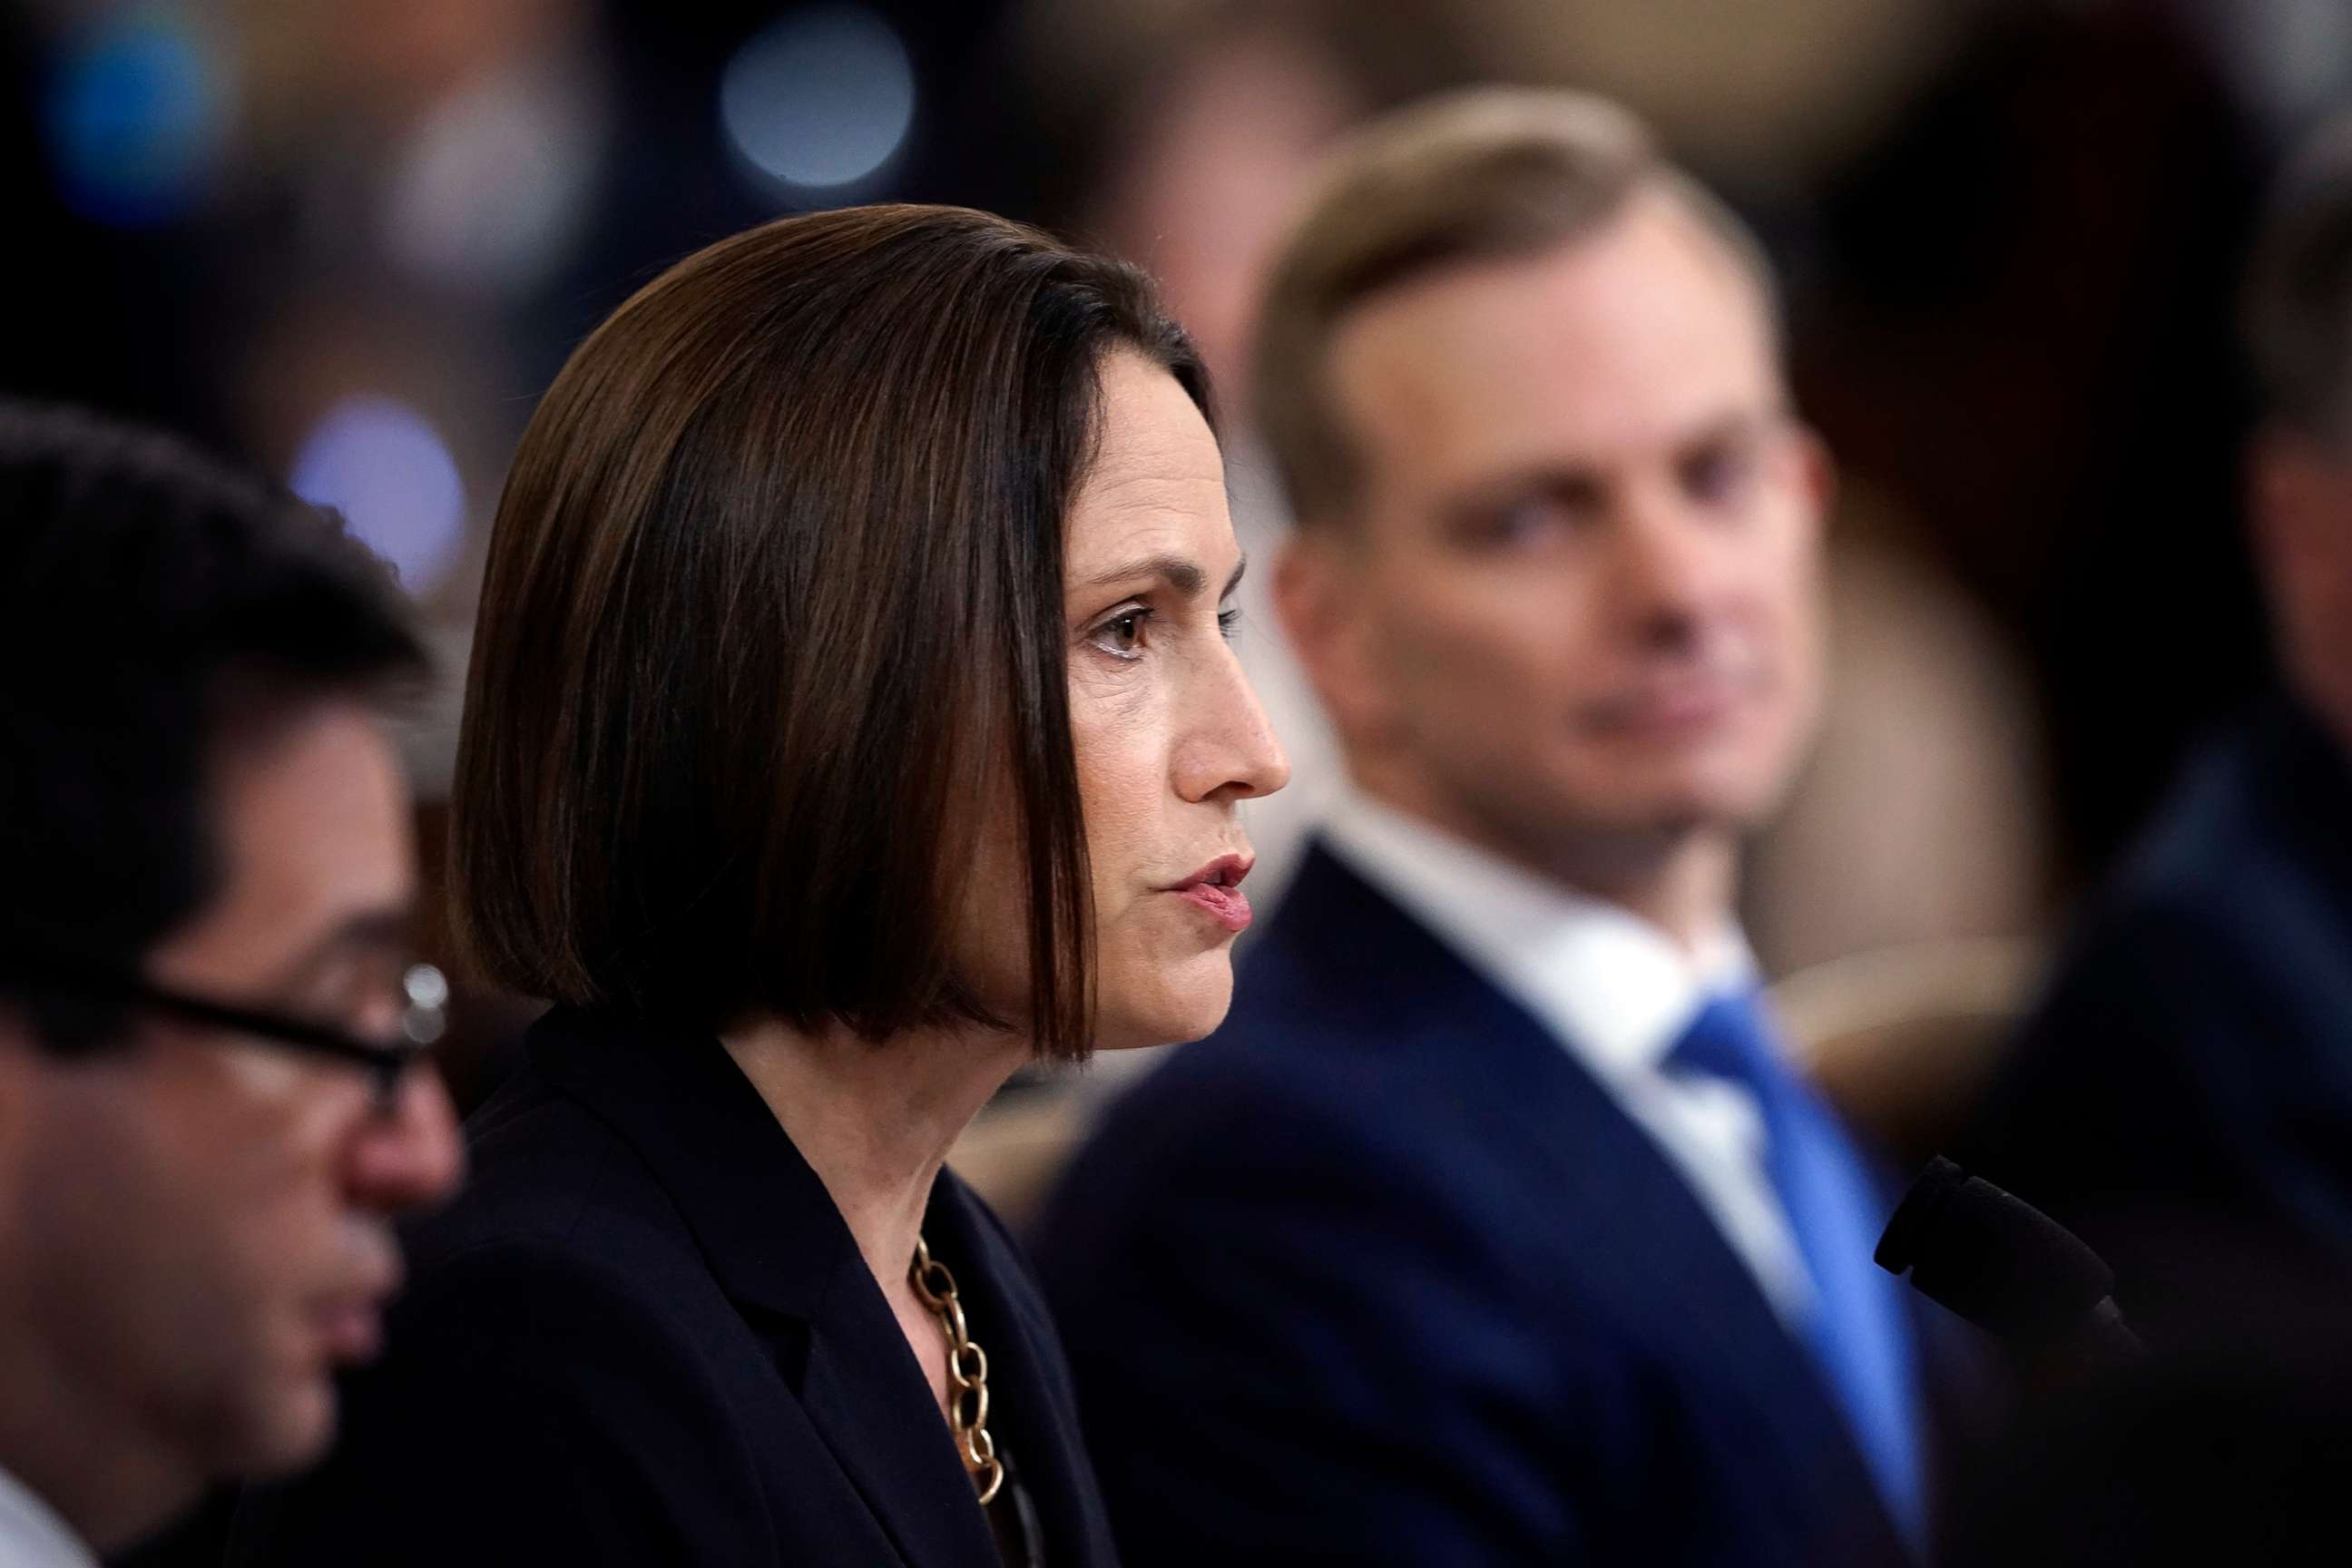 PHOTO: Fiona Hill speaks while David Holmes watches before the House Intelligence Committee on Capitol Hill, Nov. 21, 2019, in Washington.